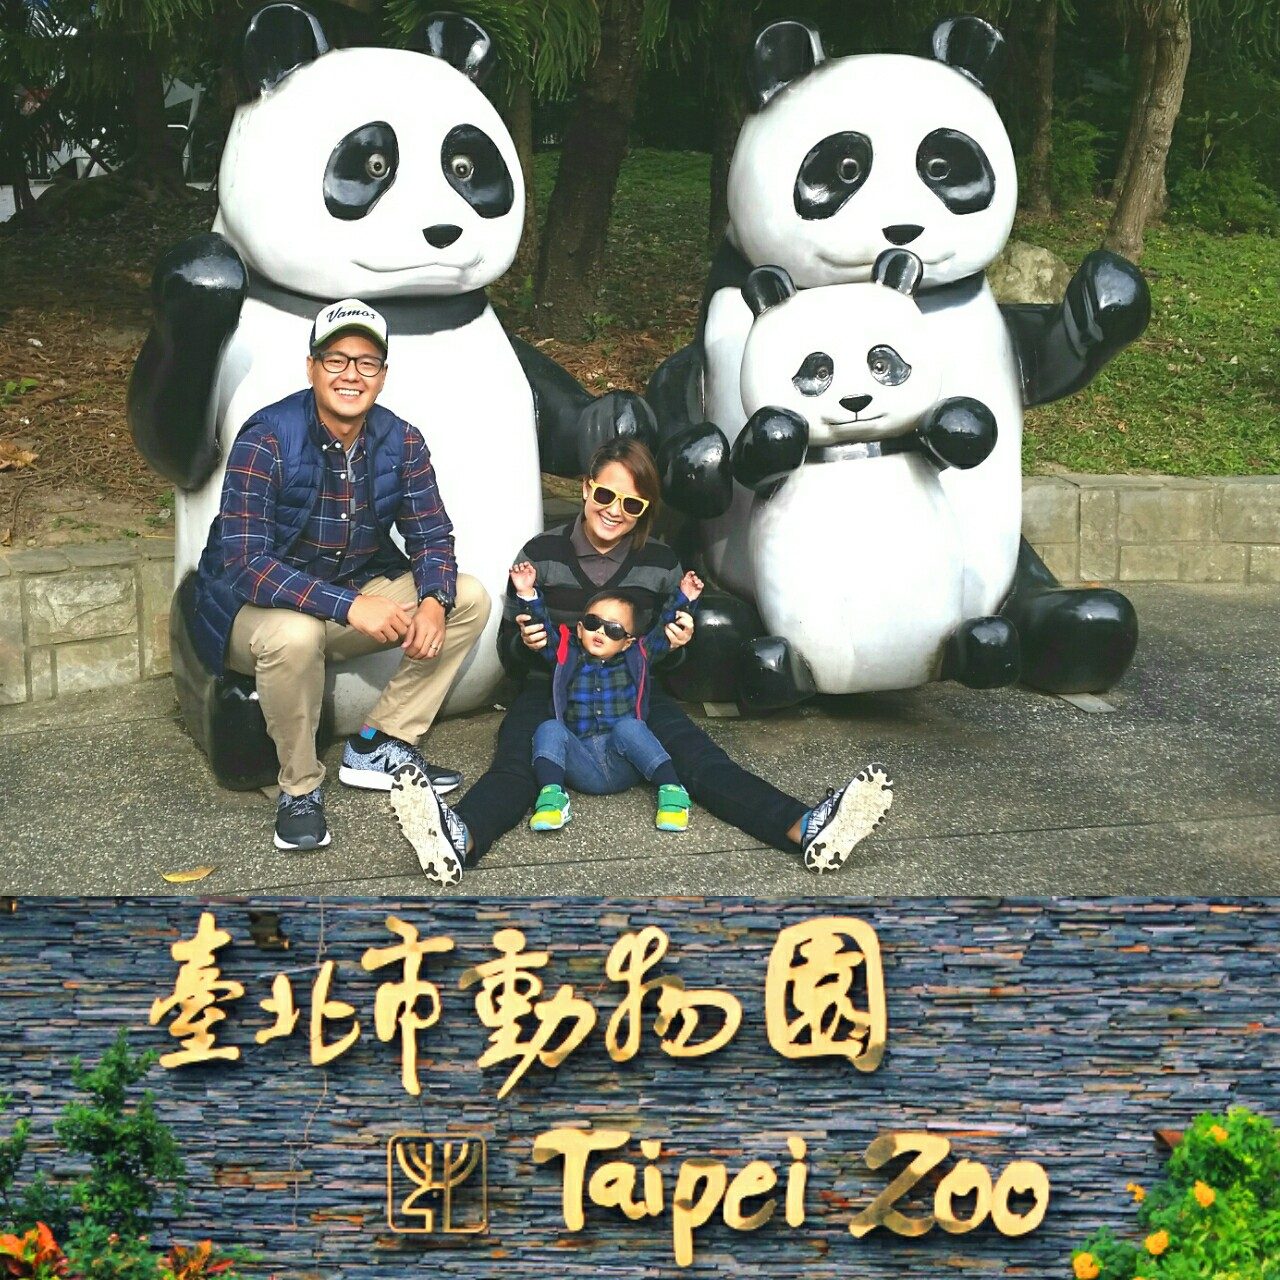 CHILD-FRIENDLY PLACES. Mother and entrepreneur Reese Tirona-Rojas advises picking places kids will enjoy, like this zoo during their family travel in Taiwan, when her son Andres was close to two years old. Photo courtesy of Reese Tirona-Rojas  